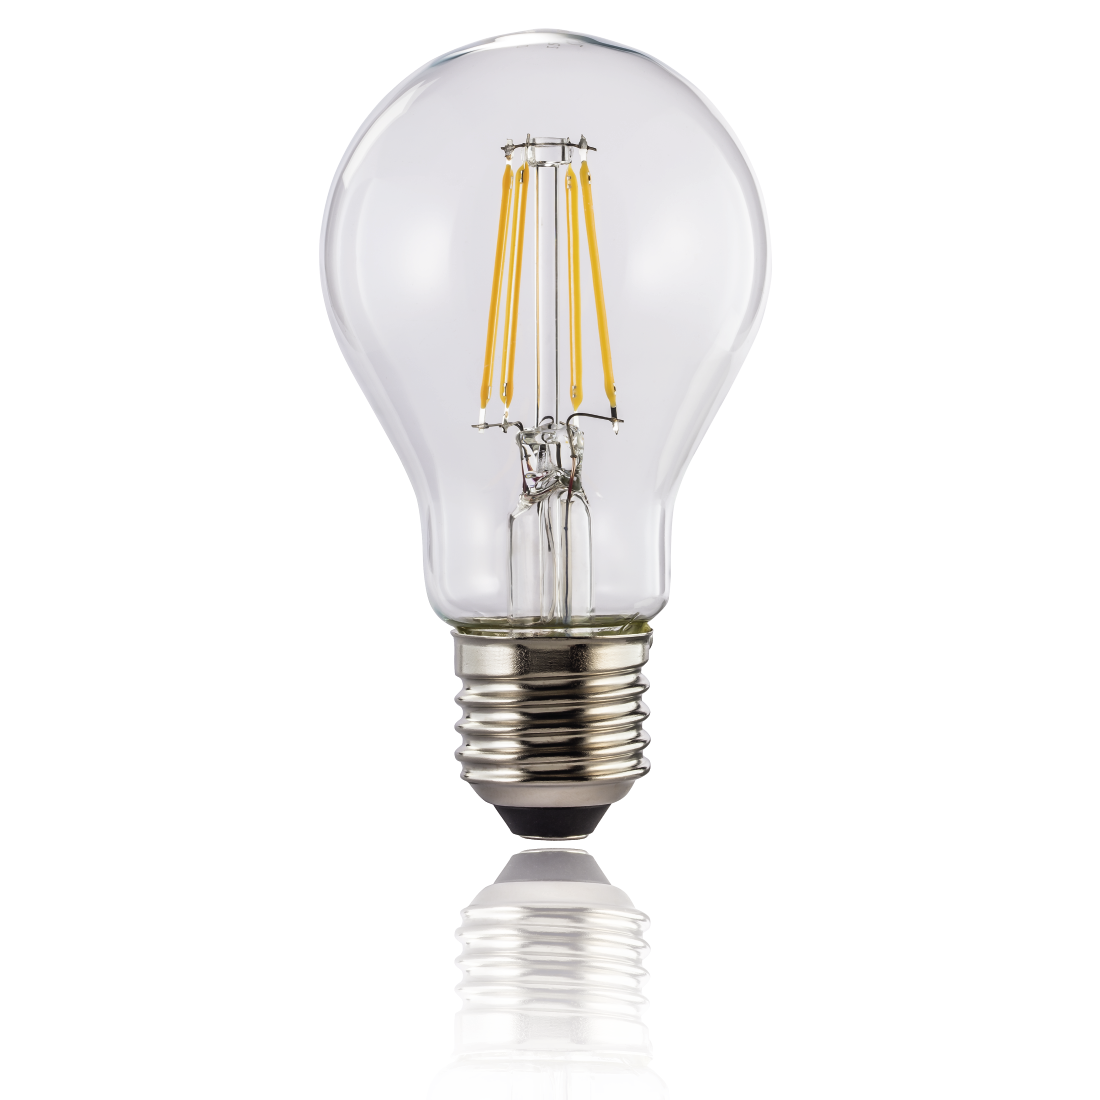 abx2 High-Res Image 2 - Xavax, LED Filament, E27, 810lm replaces 60W, incandescent bulb, warm white